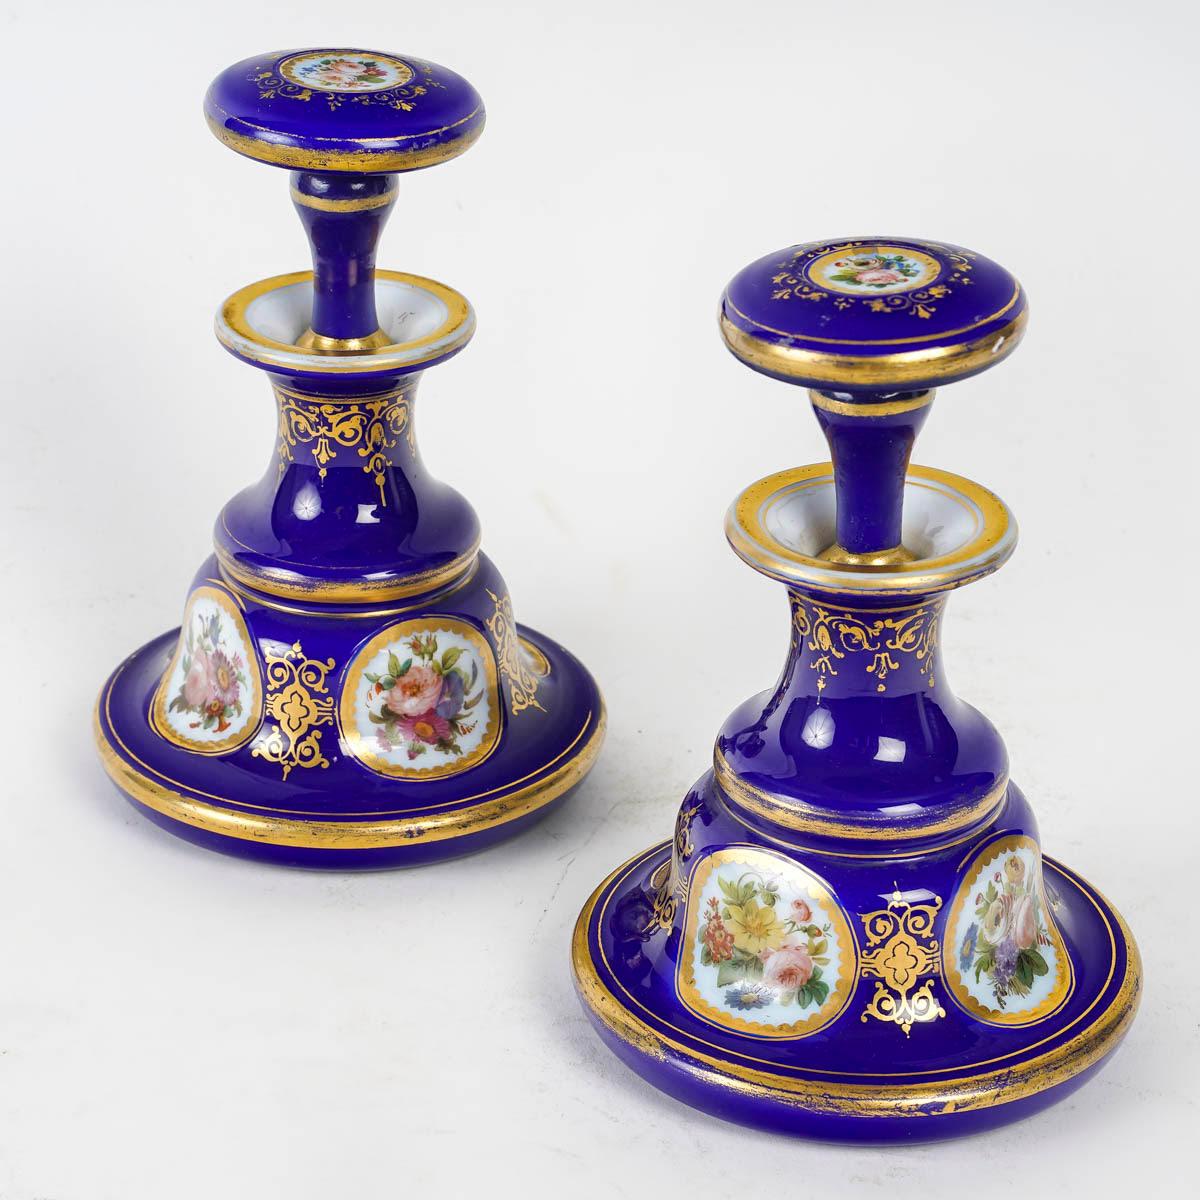 Pair of Blue Opaline Overlay bottles, 19th century, Napoleon III period.

A pair of blue opaline overlay bottles with gold highlights and floral decorations, 19th century, Napoleon III period.
h: 17cm, d: 12cm